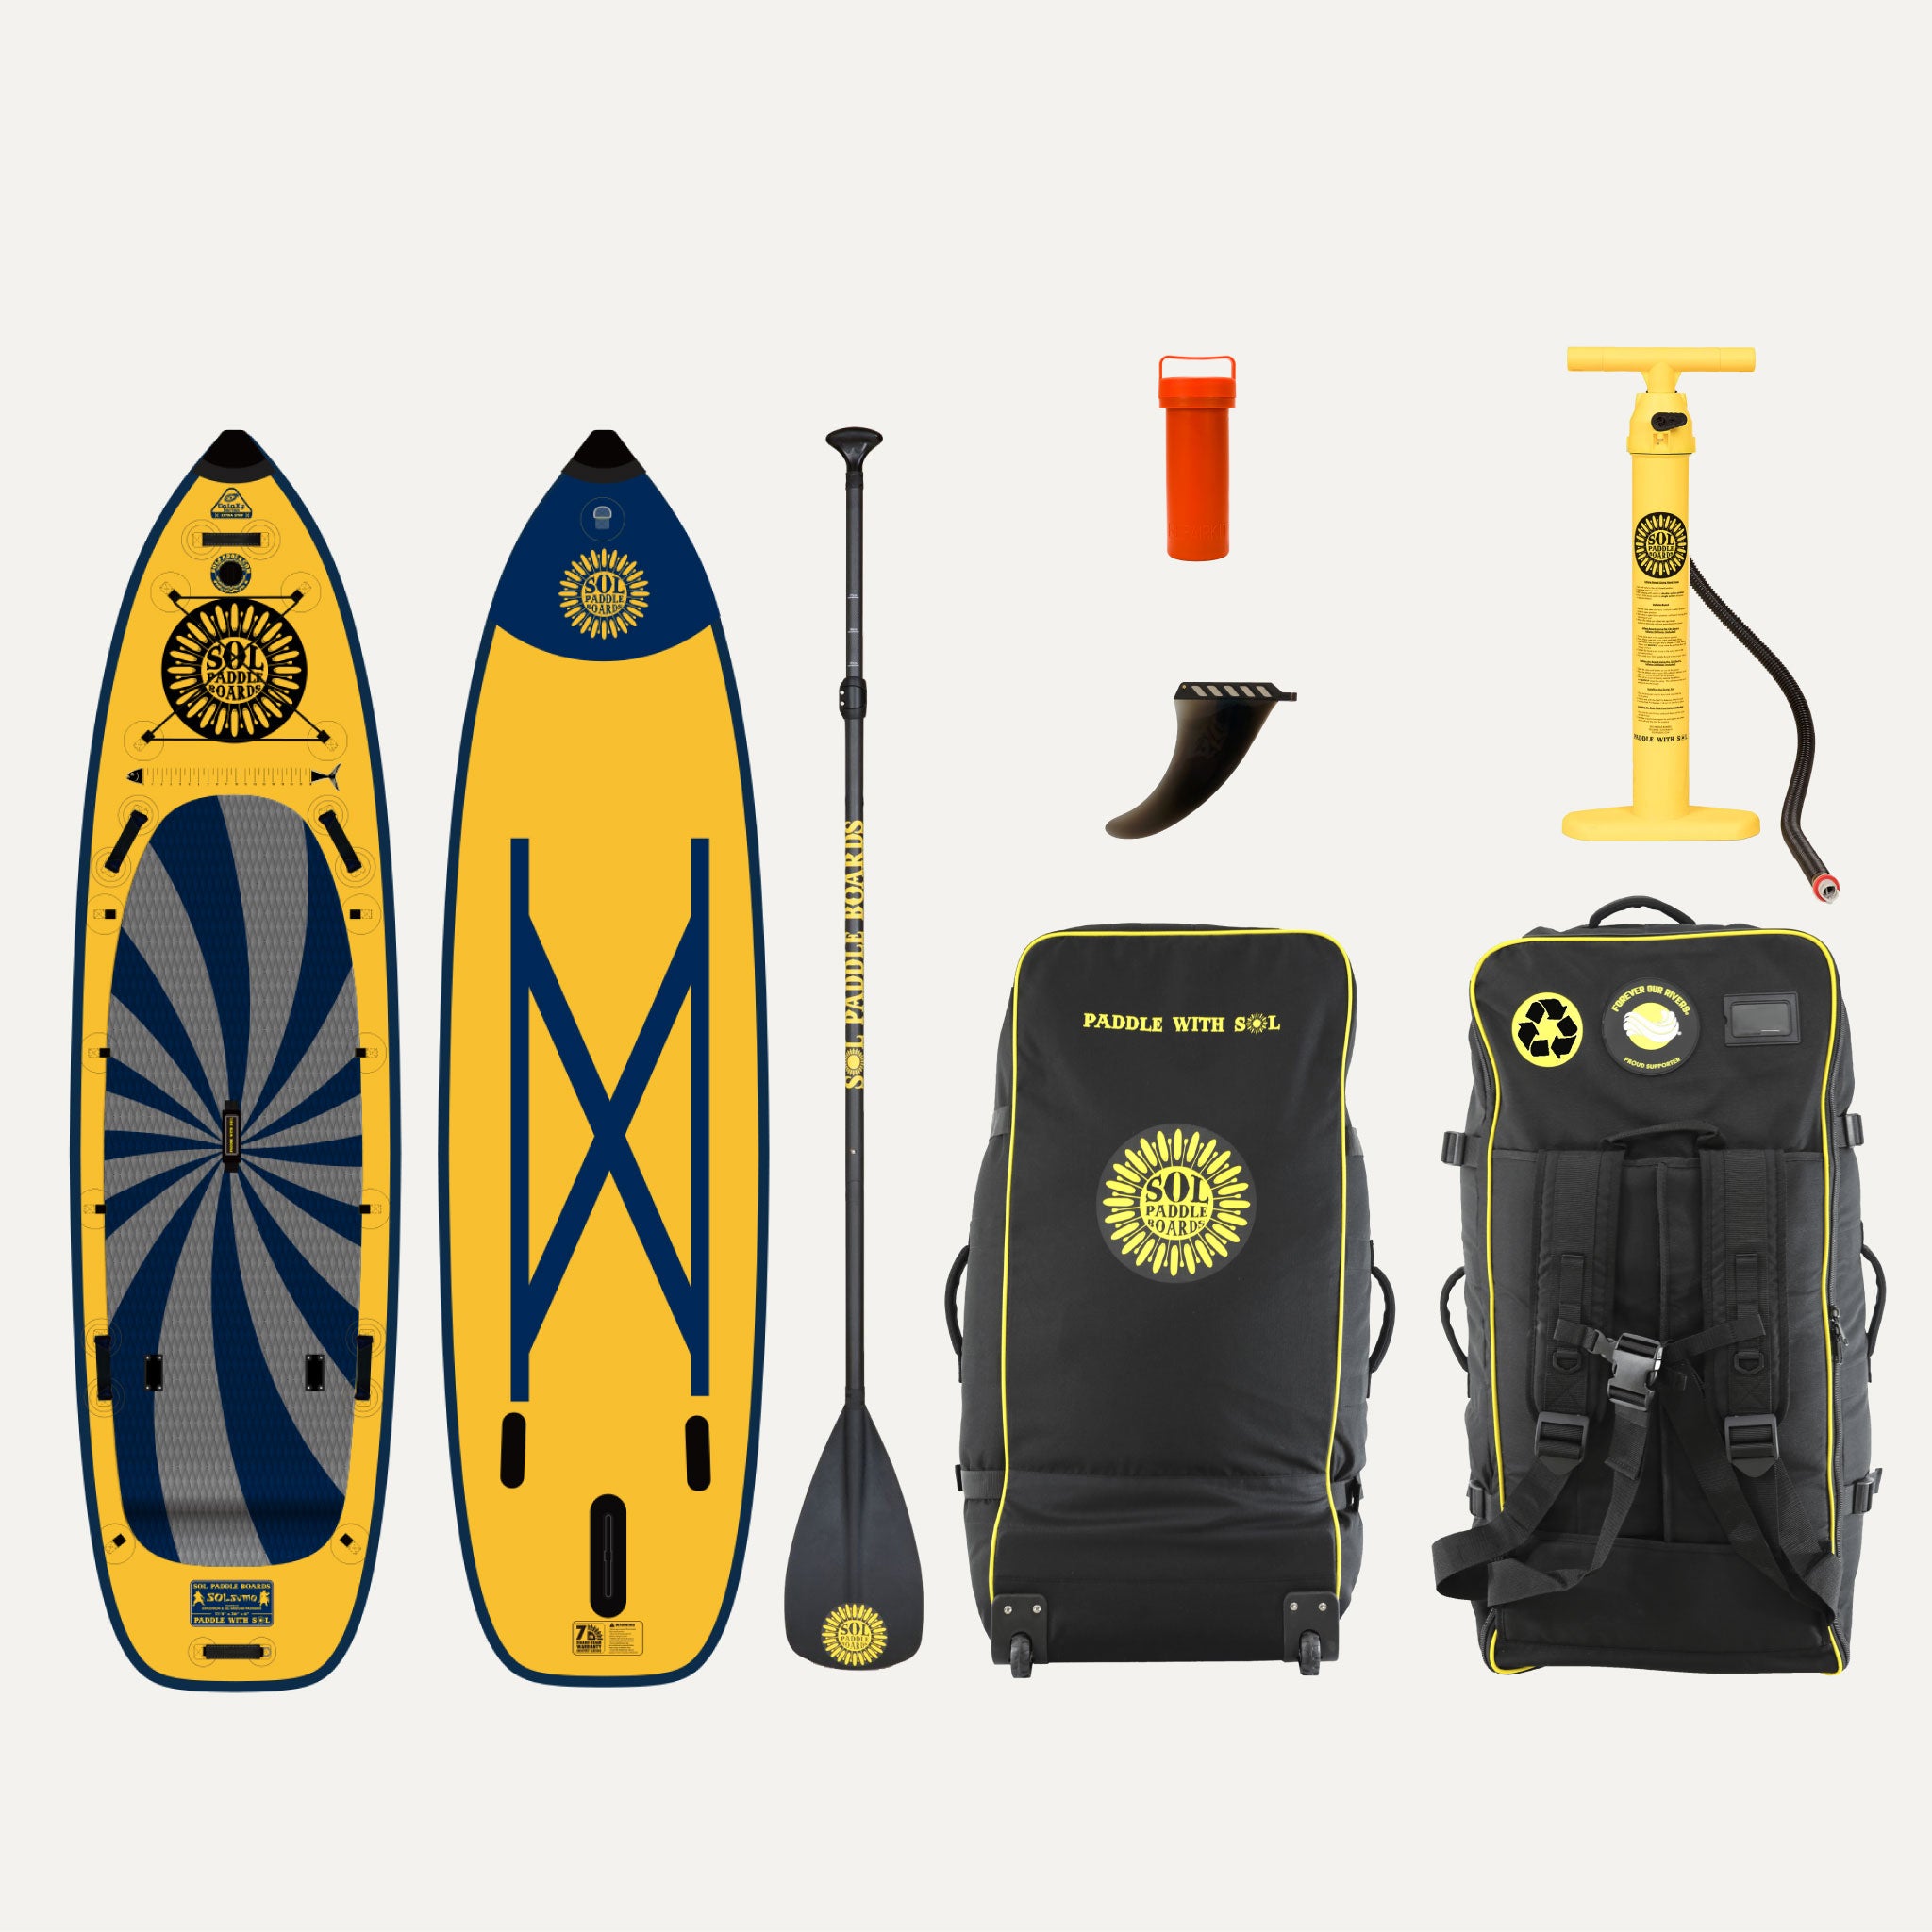 GalaXy SOLsumo Inflatable Paddle Board showcasing the top and bottom views of the SUP board and the accessories that come with it